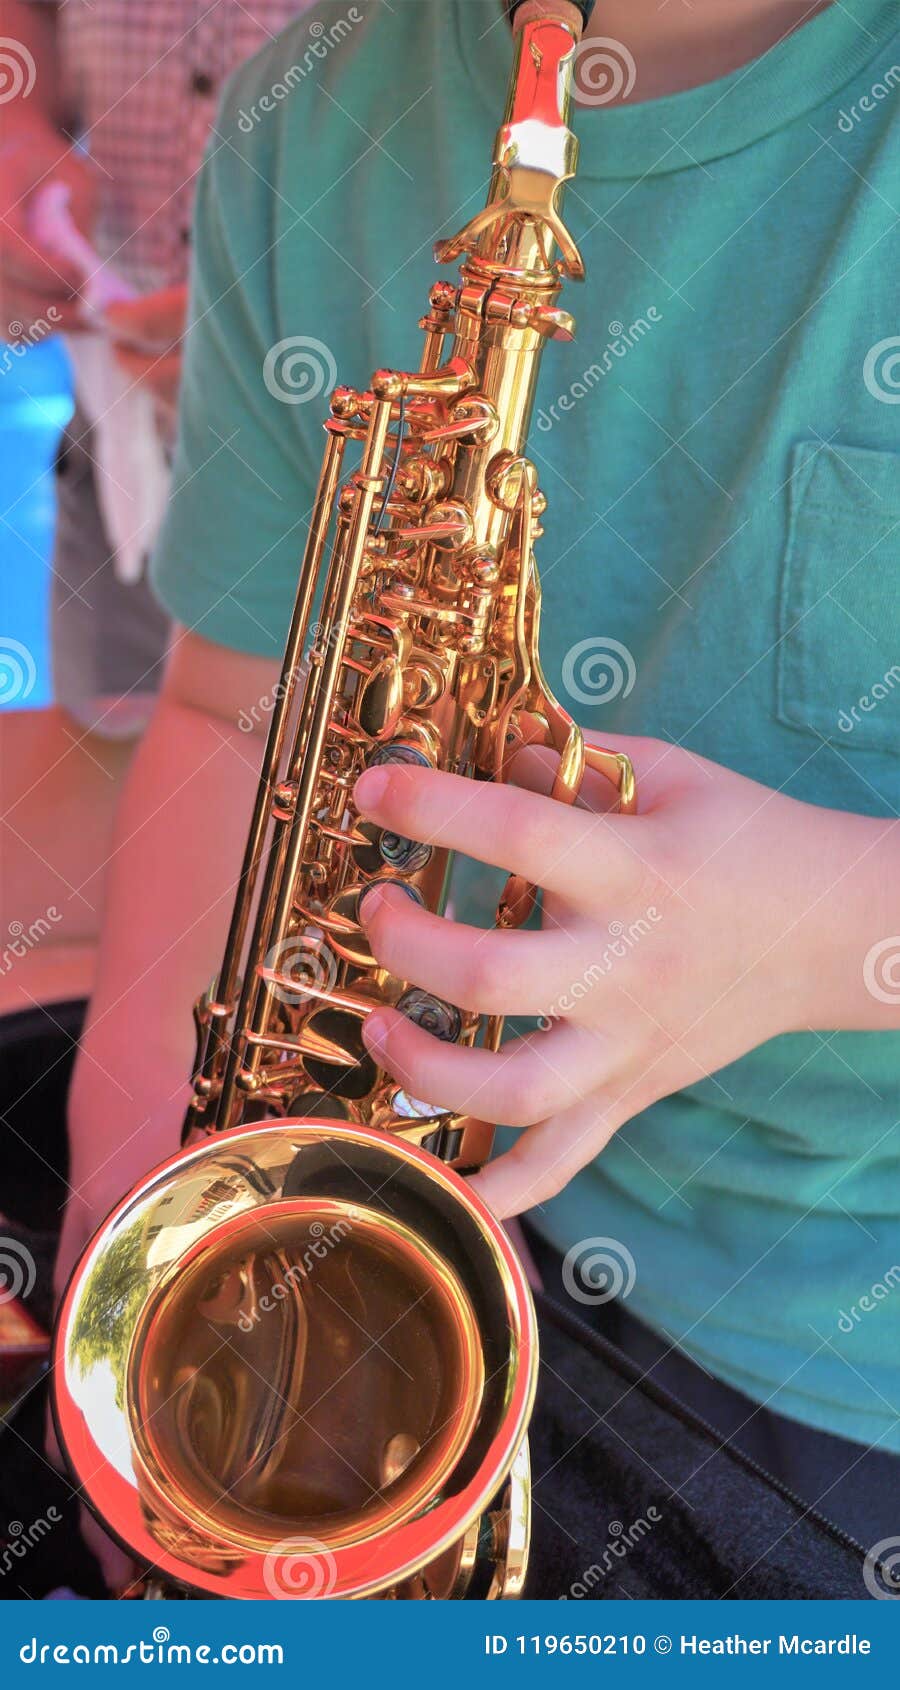 Young Man Plays Mini Saxophone with Bare Hands Stock Photo - Image